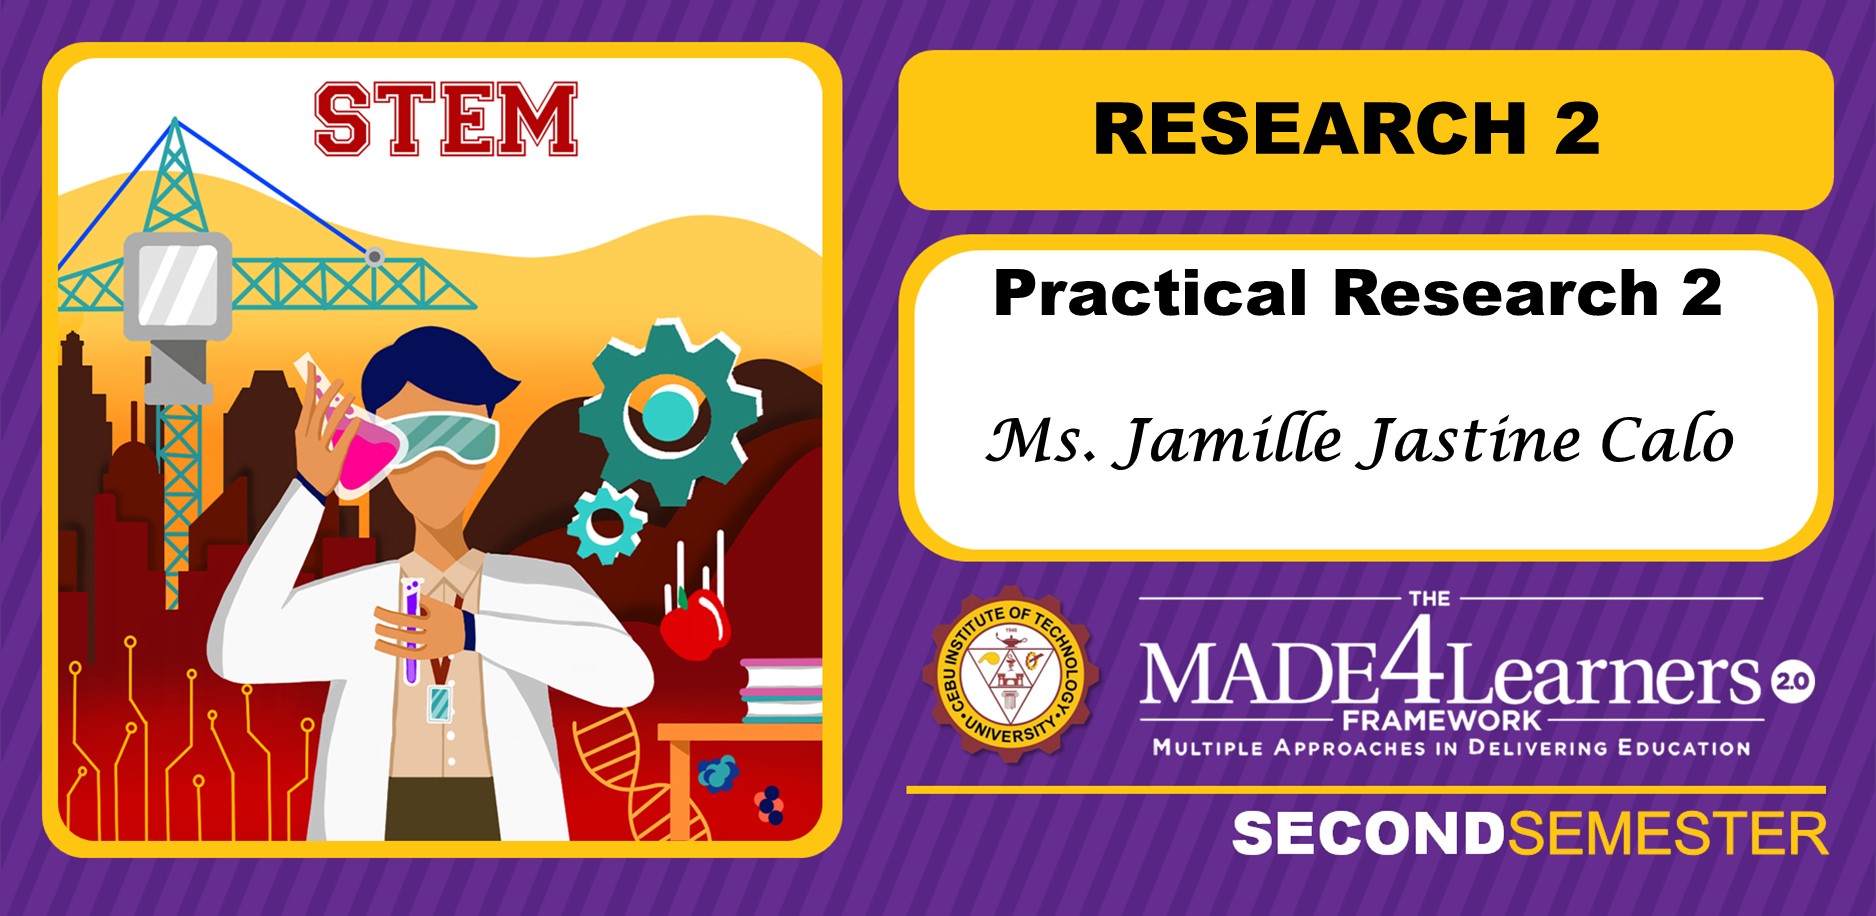 RES2: Practical Research 2 - Calo